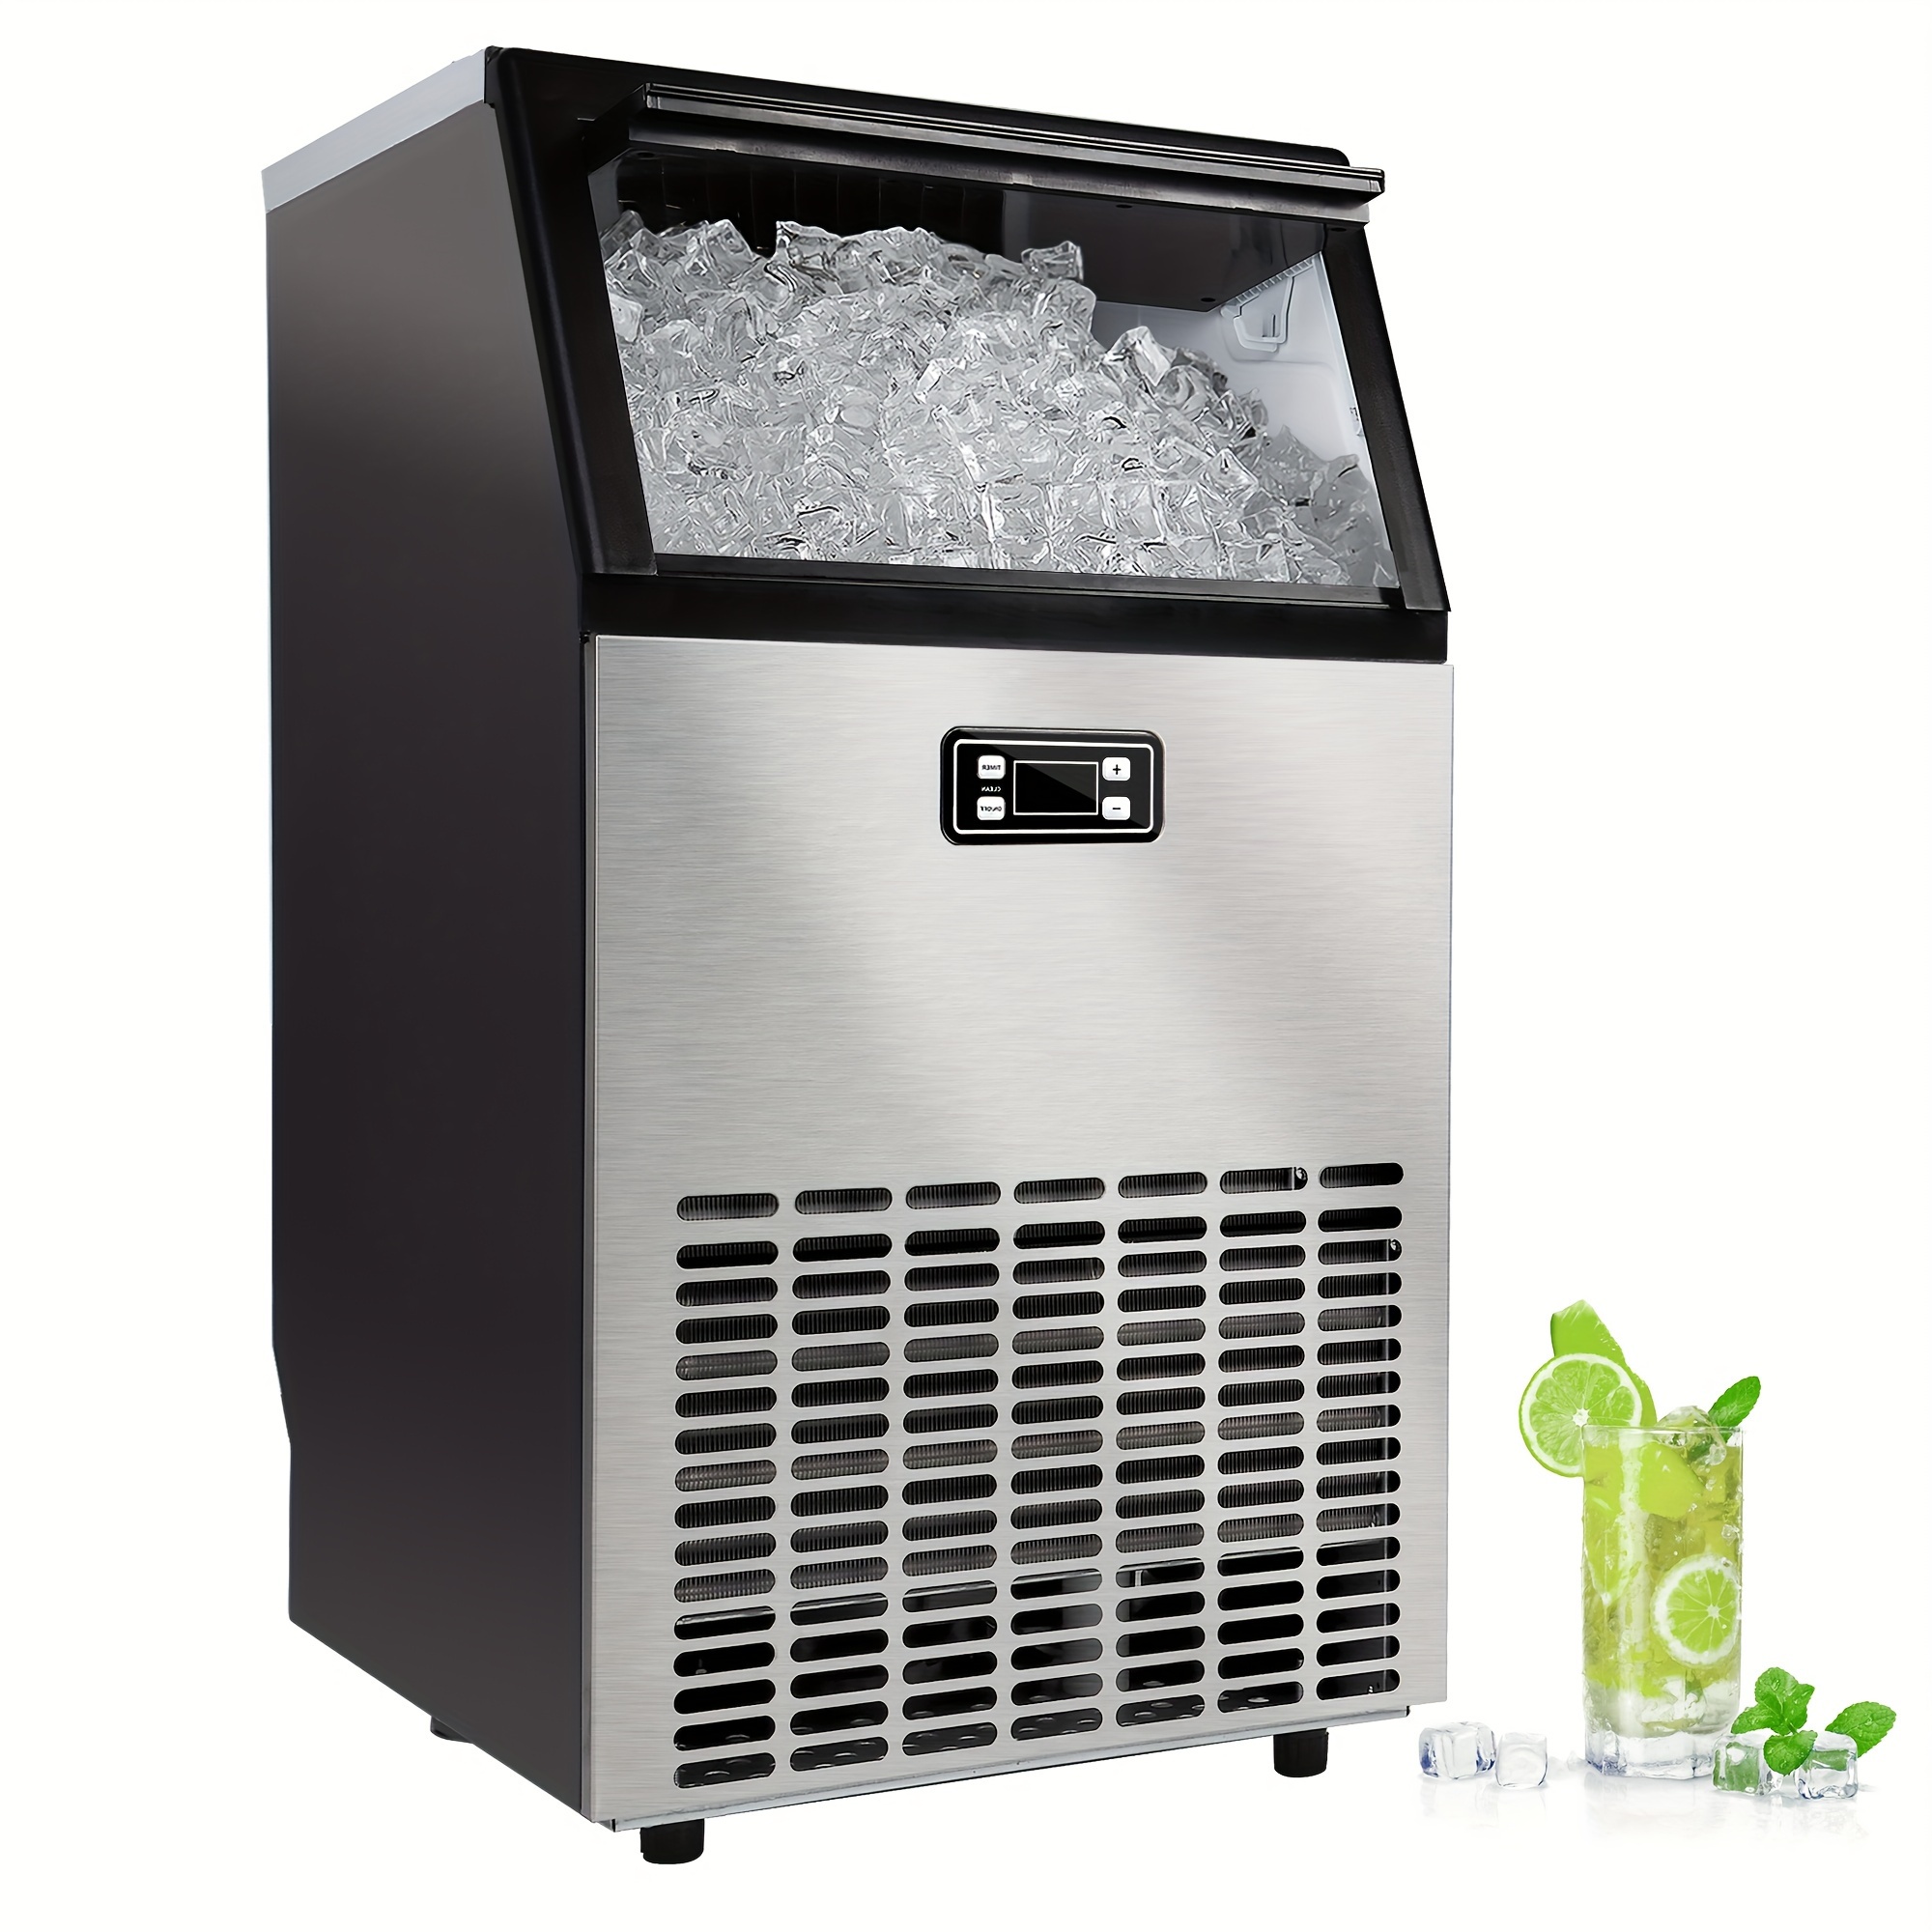 

Industrial Ice Making Machine - High Capacity 100lbs/24h, Under Counter Self-cleaning Ice Maker With 24 Hour Timer, 33lbs Ice Storage, Ideal For Schools, Homes, Bars, And Rvs